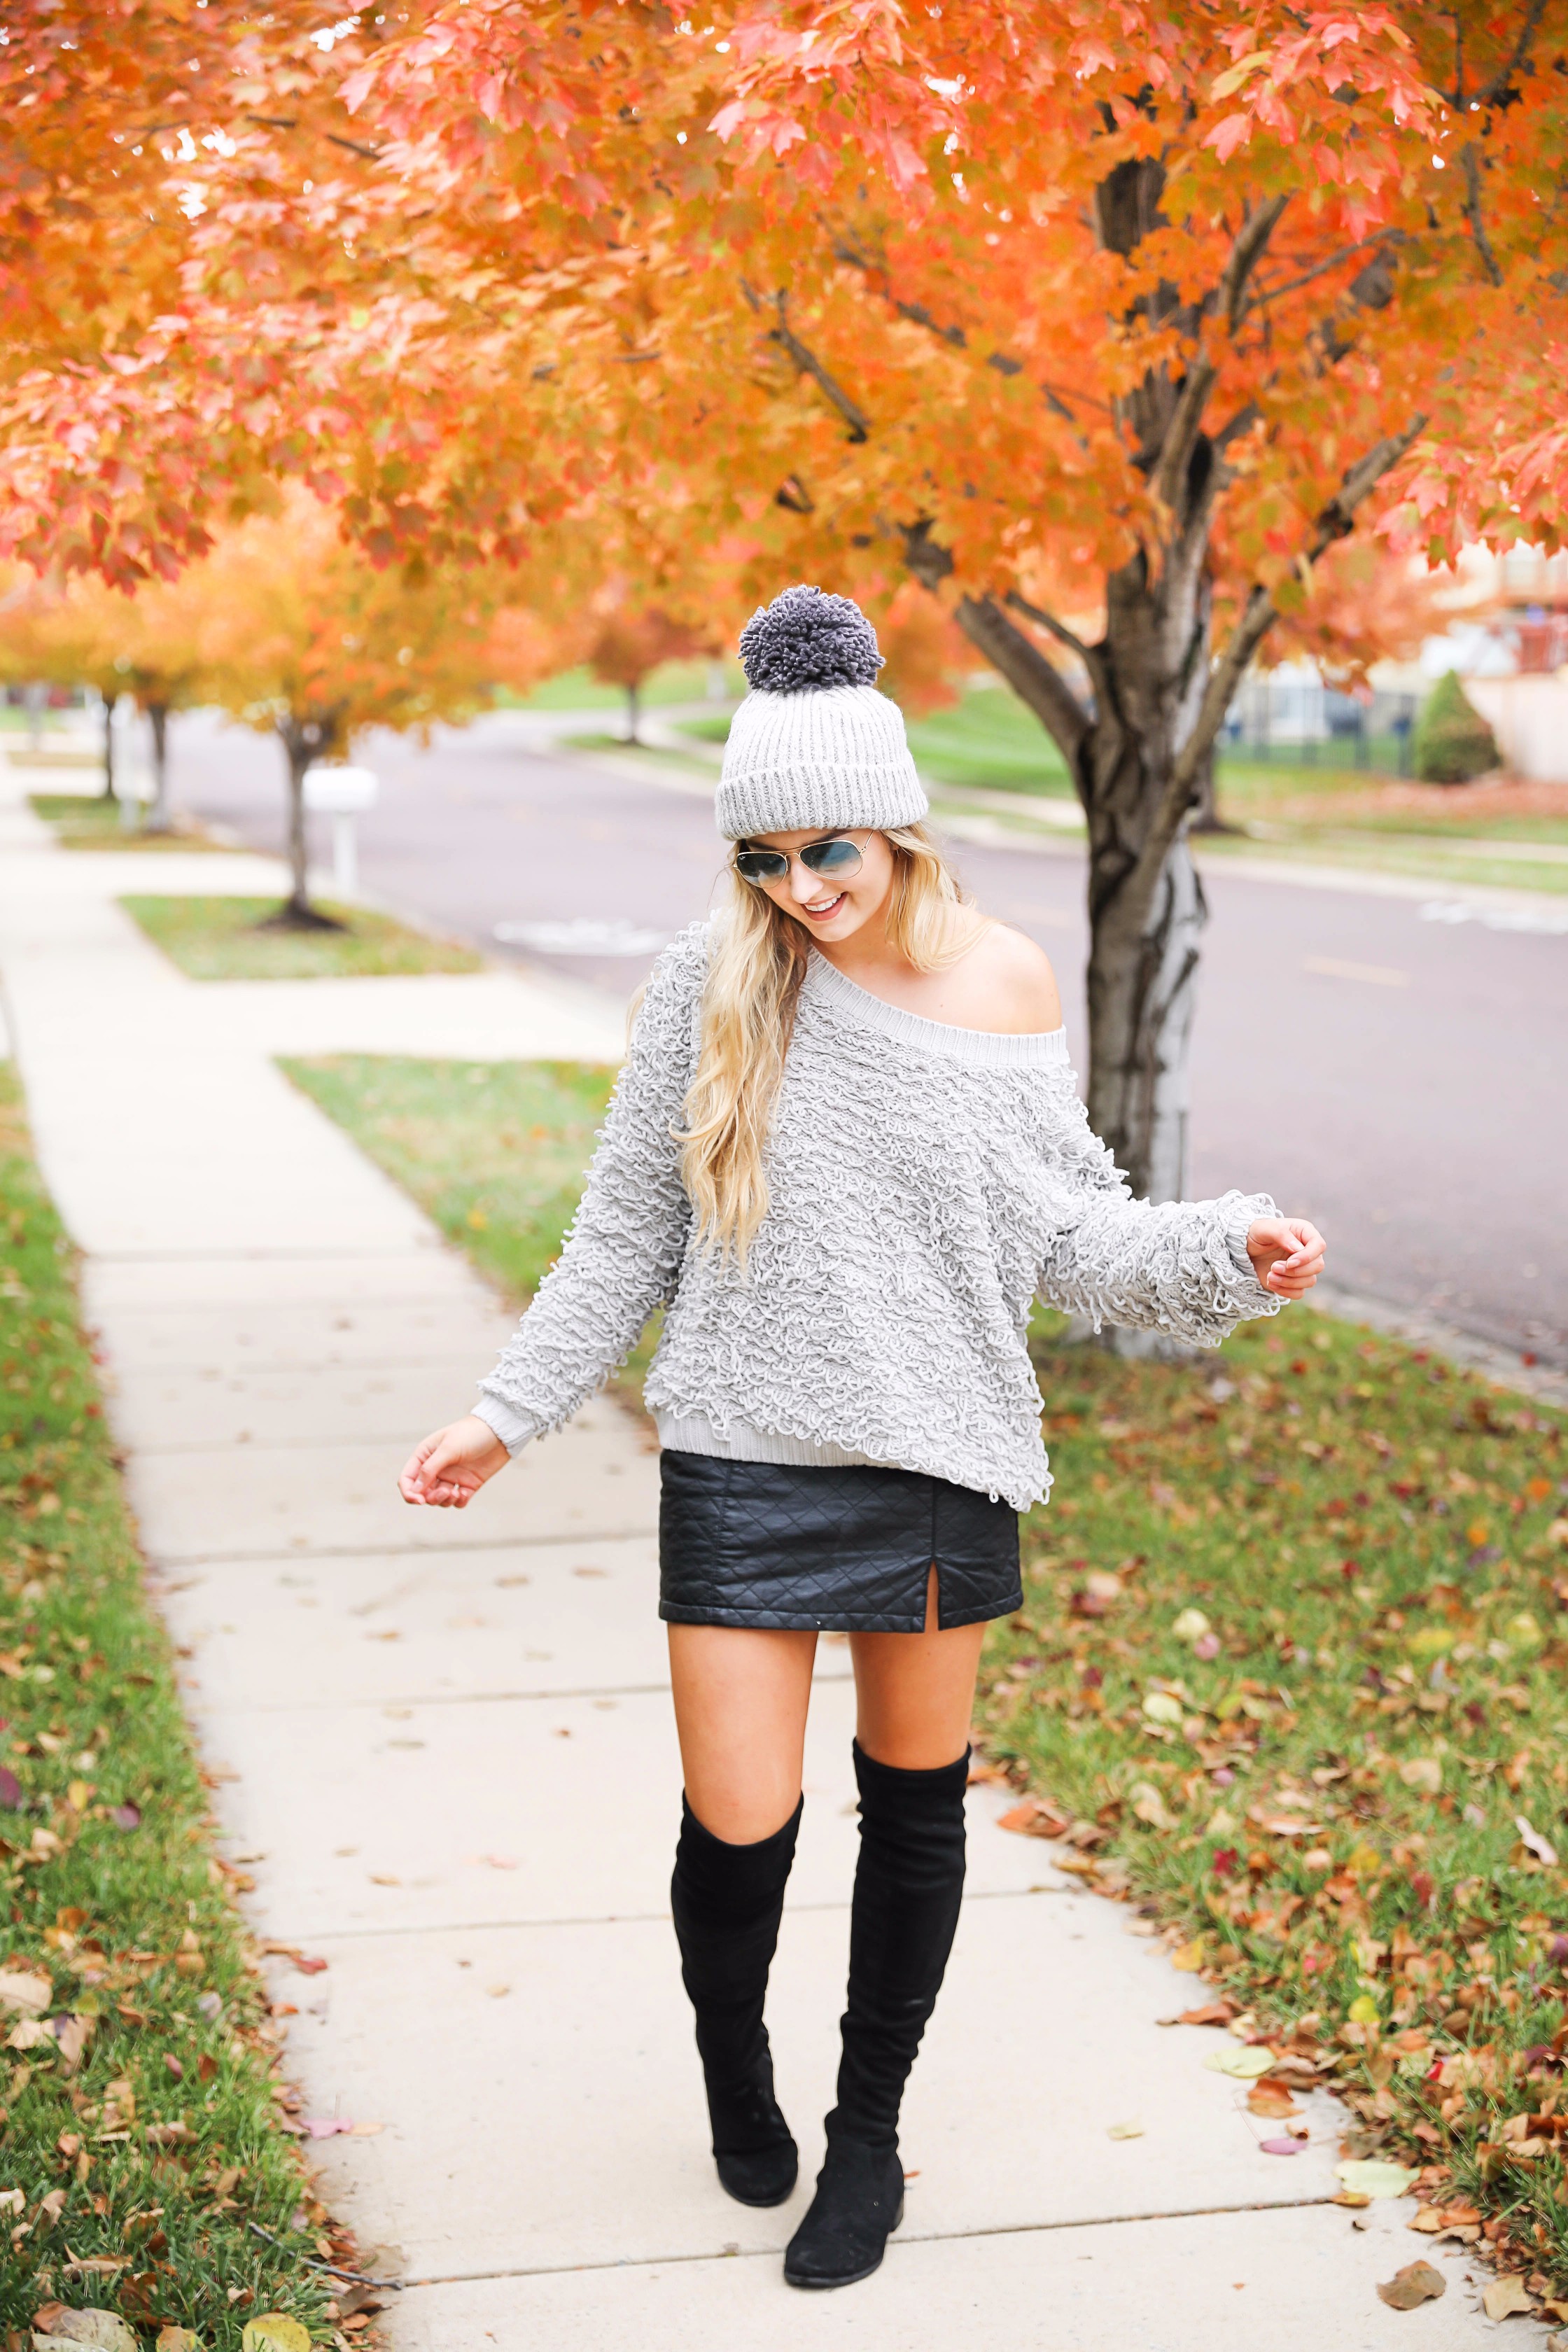 Grey loop sweater with black faux leather skirt and over the knee black boots! Paired with a pom beanie for colder days. Such a cute fall and winter outfit! Find the details on fashion blog daily dose of charm by lauren lindmark